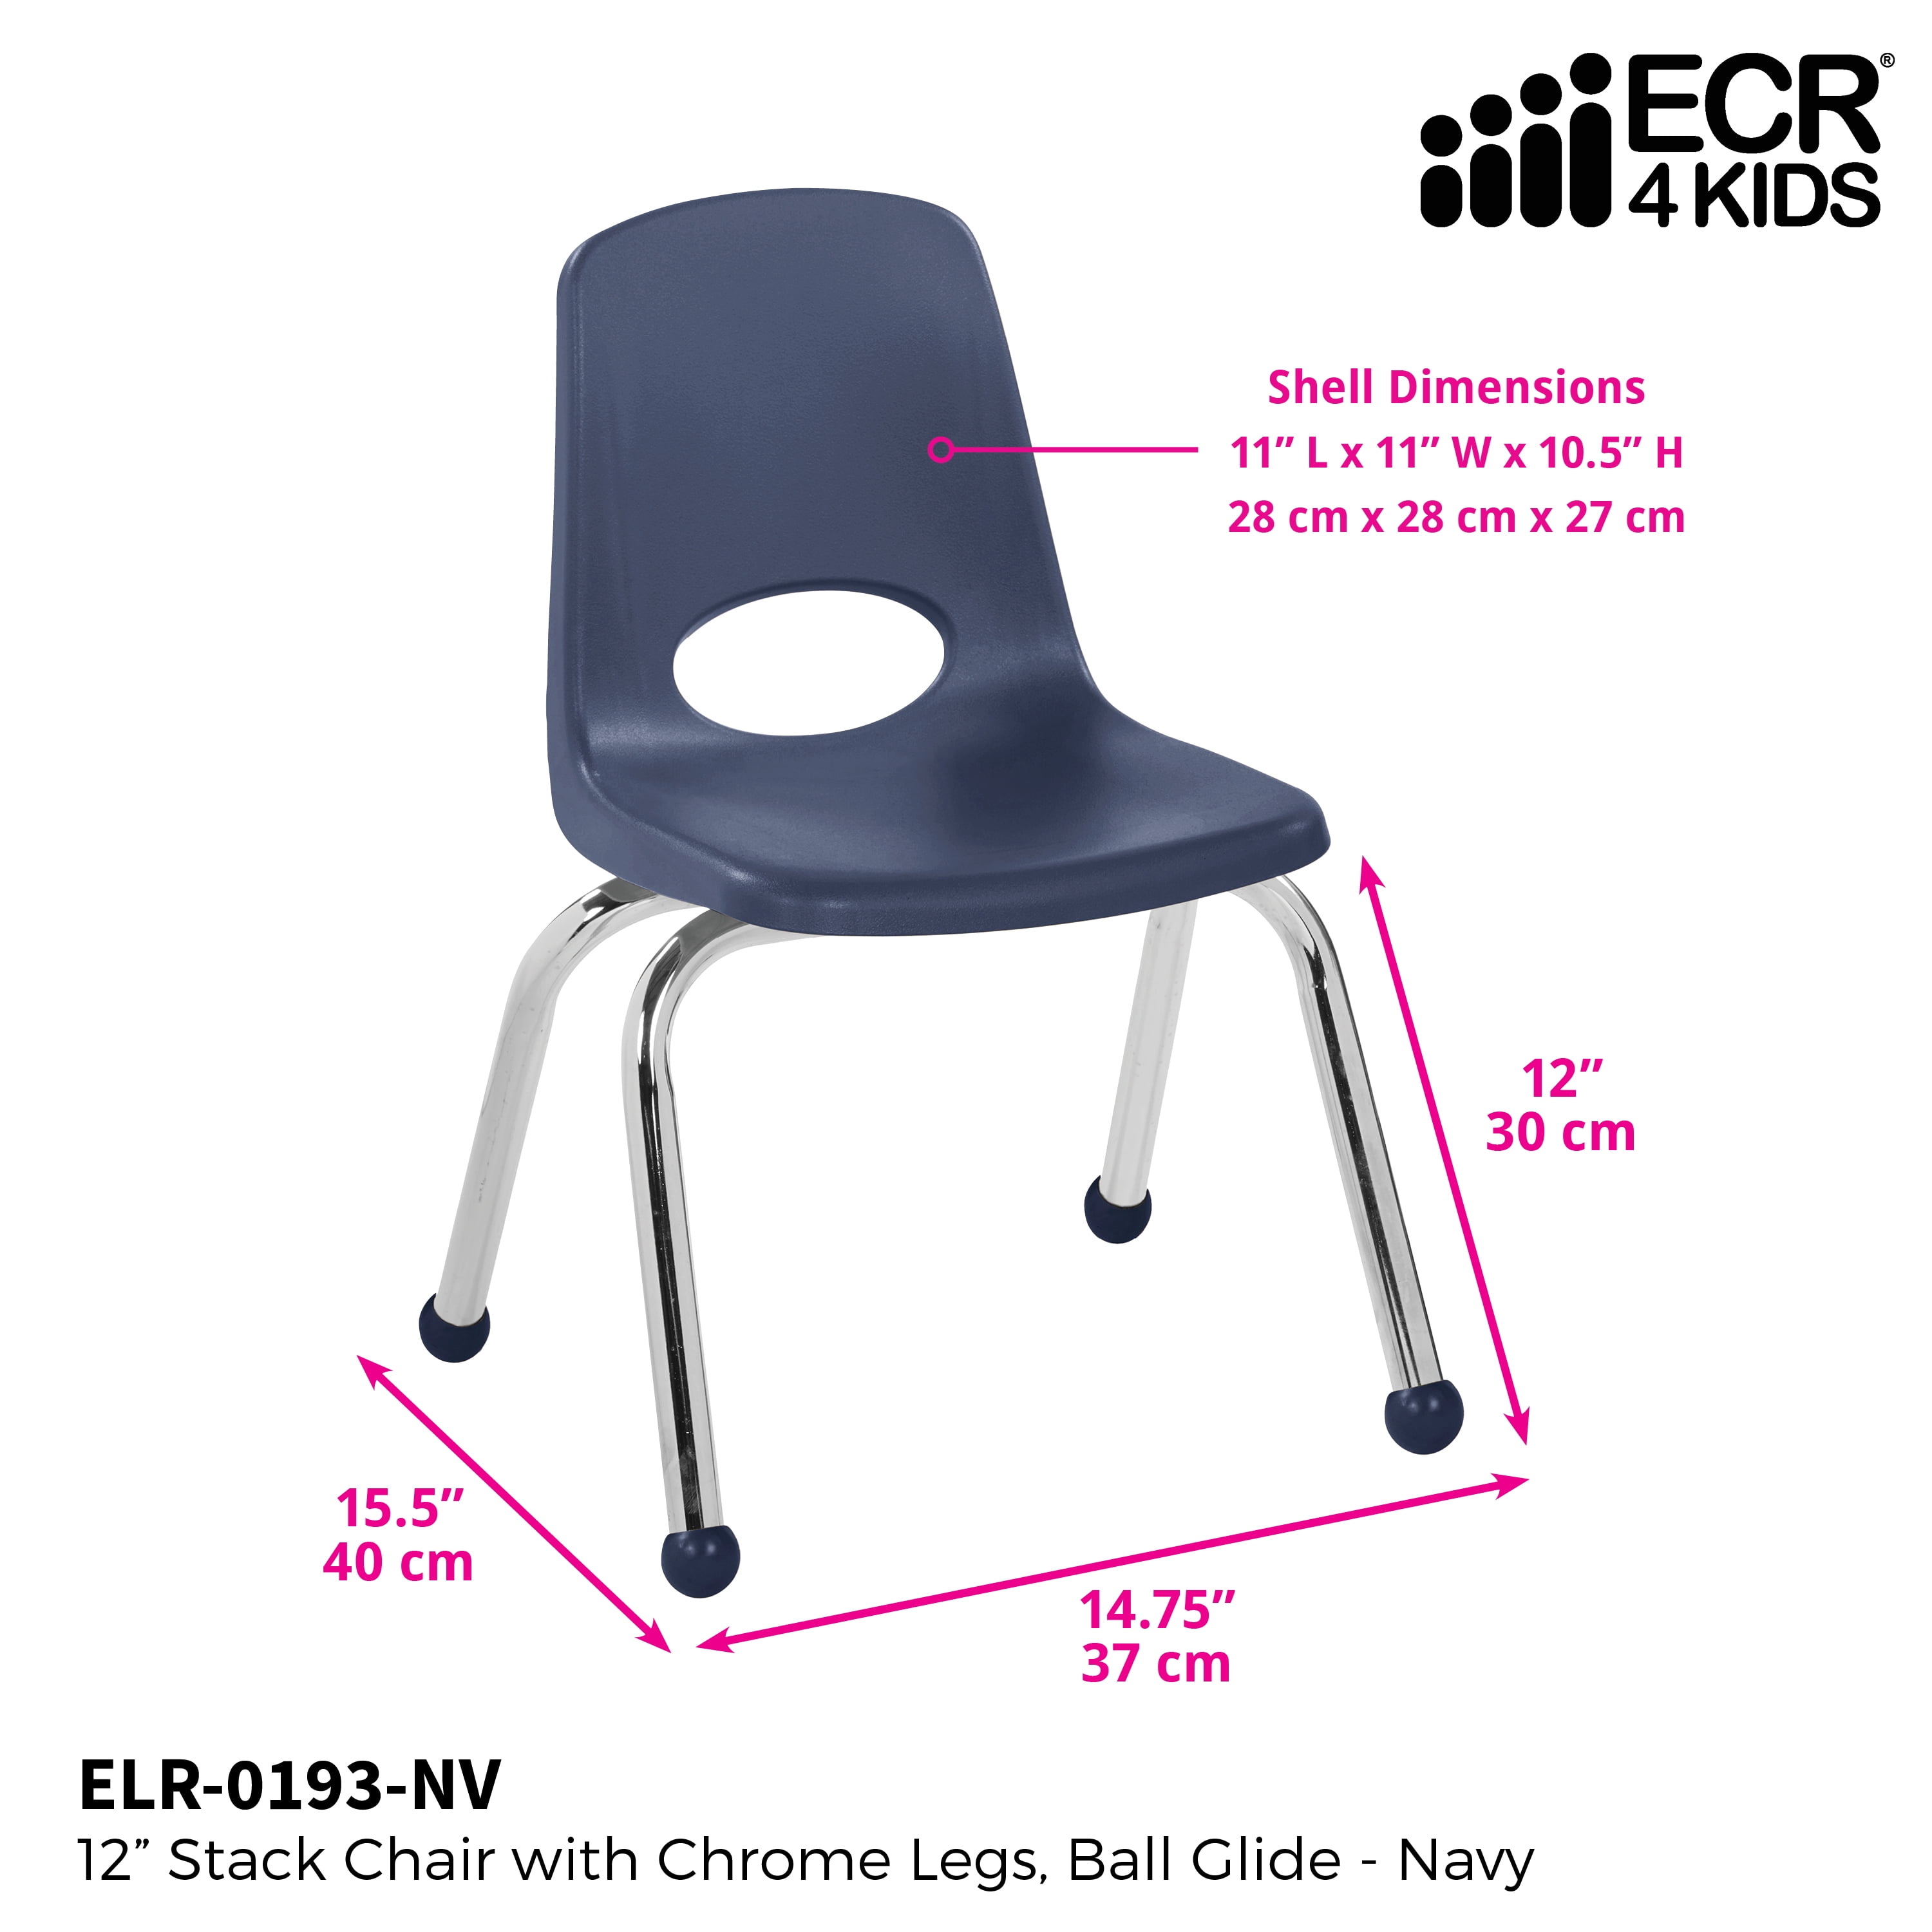 Yellow 6-Pack Chrome Legs with Ball Glides ECR4Kids 10 School Stack Chair 